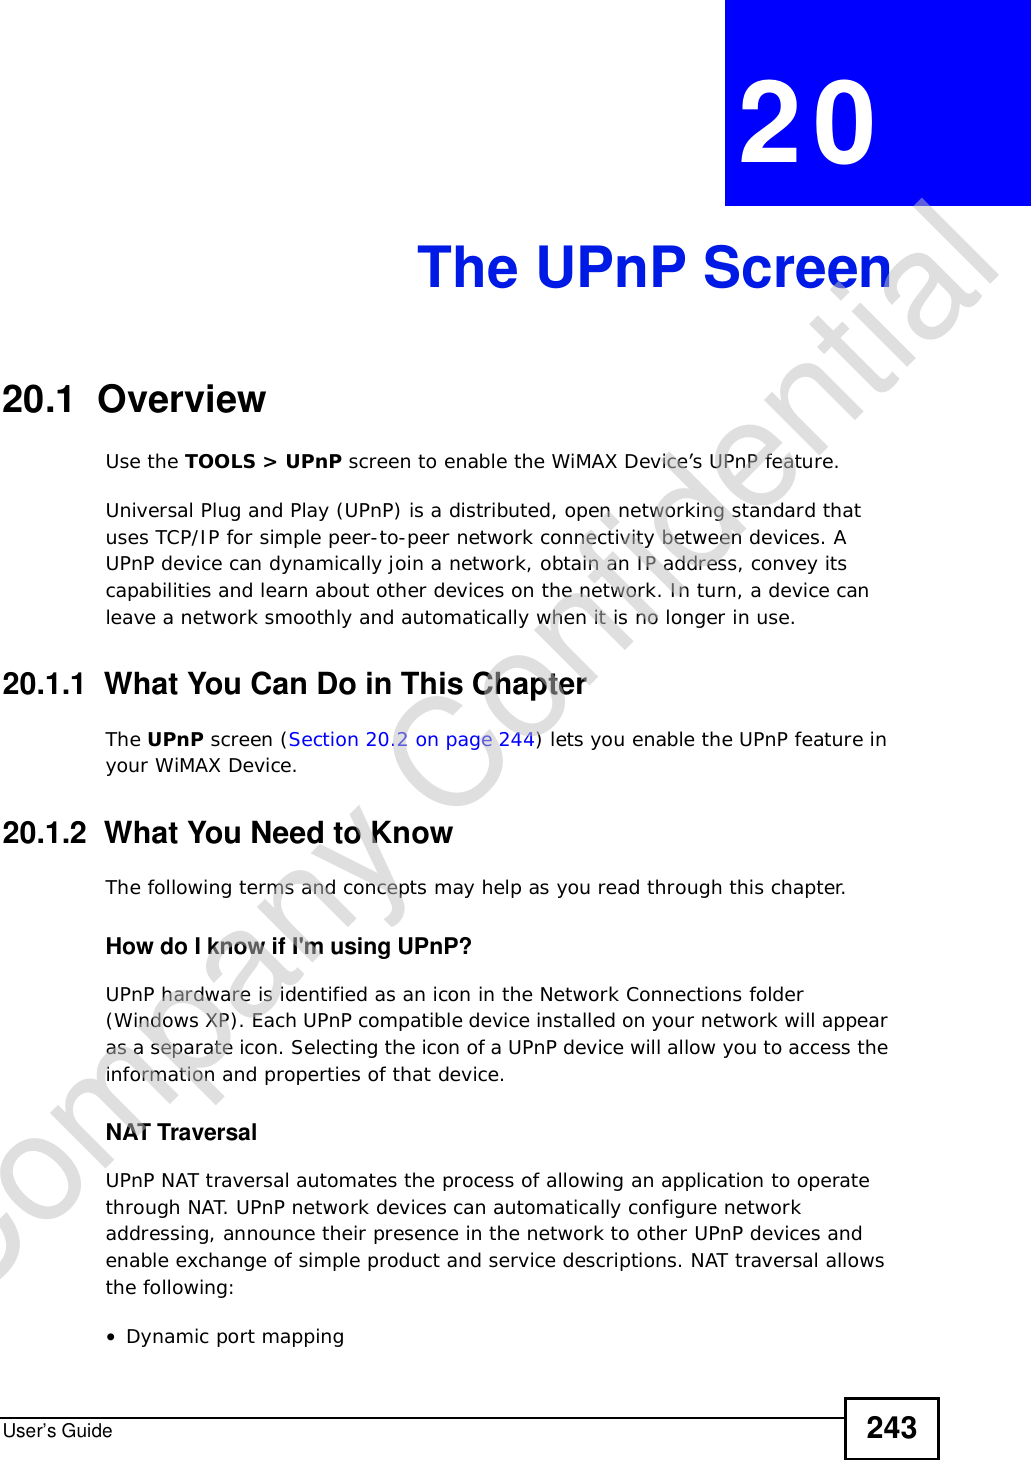 User’s Guide 243CHAPTER 20The UPnP Screen20.1  OverviewUse the TOOLS &gt; UPnP screen to enable the WiMAX Device’s UPnP feature.Universal Plug and Play (UPnP) is a distributed, open networking standard that uses TCP/IP for simple peer-to-peer network connectivity between devices. A UPnP device can dynamically join a network, obtain an IP address, convey its capabilities and learn about other devices on the network. In turn, a device can leave a network smoothly and automatically when it is no longer in use.20.1.1  What You Can Do in This ChapterThe UPnP screen (Section 20.2 on page 244) lets you enable the UPnP feature in your WiMAX Device.20.1.2  What You Need to KnowThe following terms and concepts may help as you read through this chapter.How do I know if I&apos;m using UPnP? UPnP hardware is identified as an icon in the Network Connections folder (Windows XP). Each UPnP compatible device installed on your network will appear as a separate icon. Selecting the icon of a UPnP device will allow you to access the information and properties of that device. NAT TraversalUPnP NAT traversal automates the process of allowing an application to operate through NAT. UPnP network devices can automatically configure network addressing, announce their presence in the network to other UPnP devices and enable exchange of simple product and service descriptions. NAT traversal allows the following:•Dynamic port mappingCompany Confidential